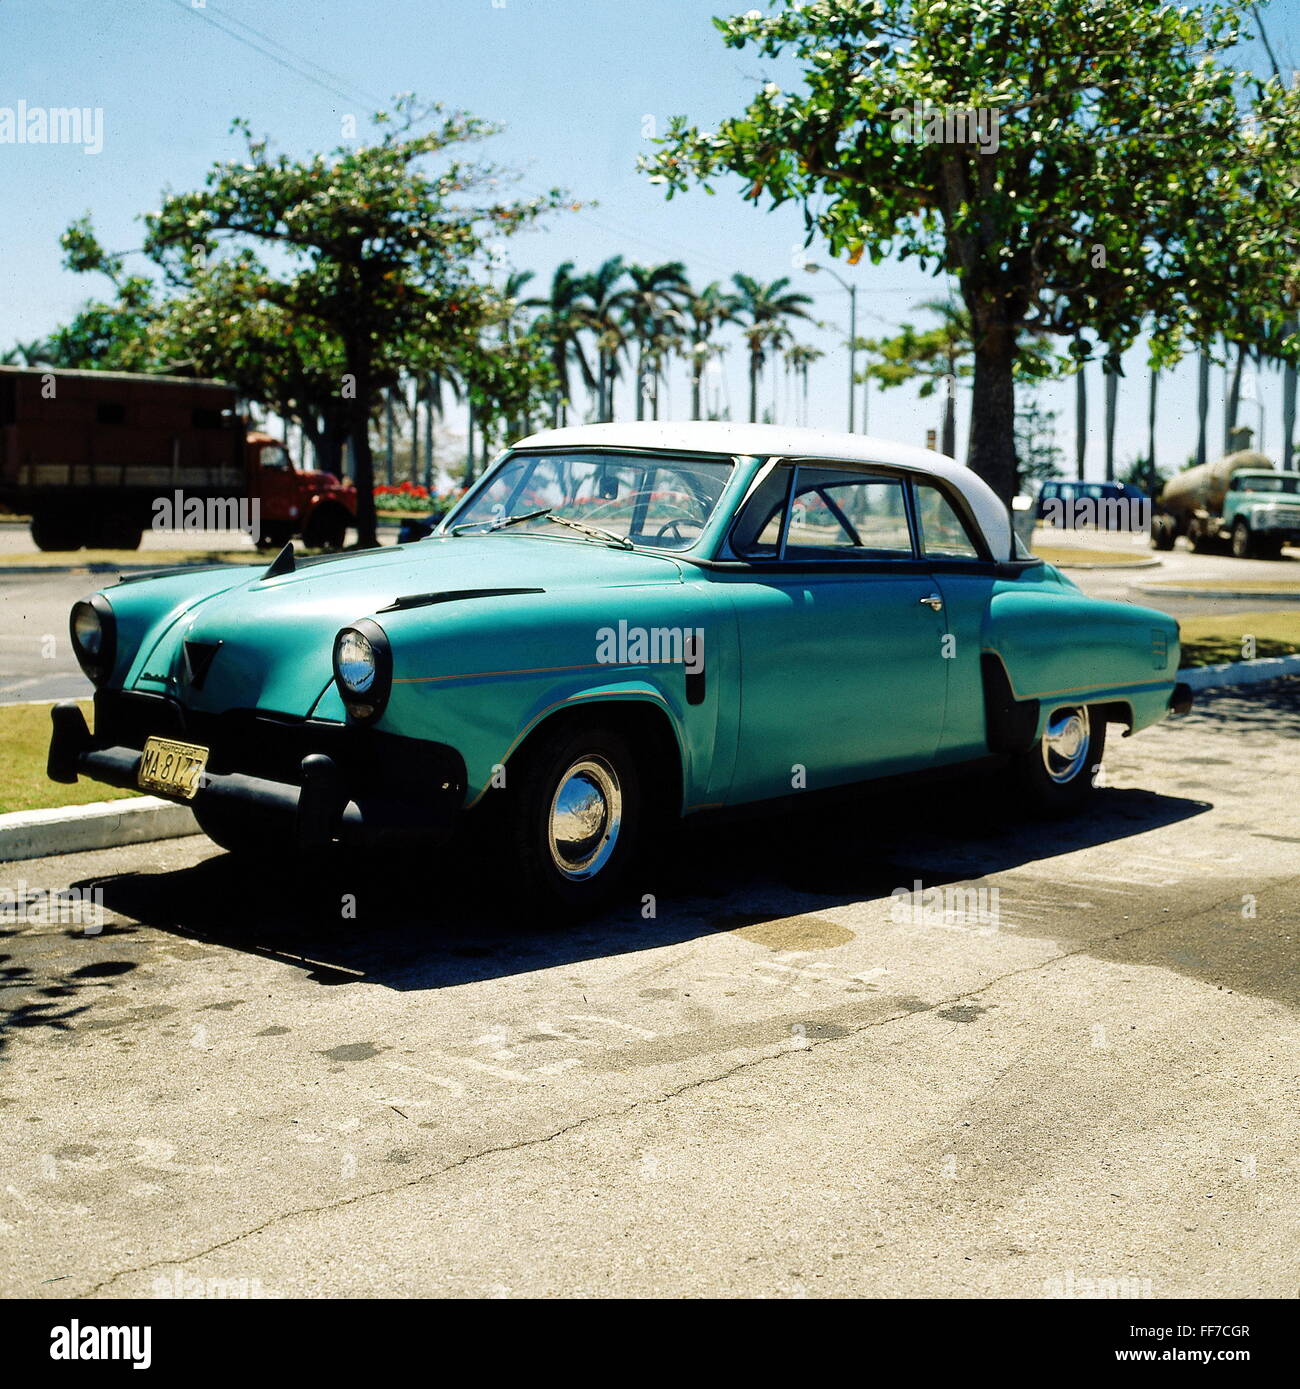 transport / transportation, car, vehicle variants, Studebaker, year of construction: 1950s, 50s, 20th century, historic, historical, veteran car, classic car, vintage car, veteran cars, classic cars, vintage cars, standing, roadside, street, automobile, automobiles, car, cars, turquoise, cyan, teal, bluish green, blue-green, 1980s, Additional-Rights-Clearences-Not Available Stock Photo